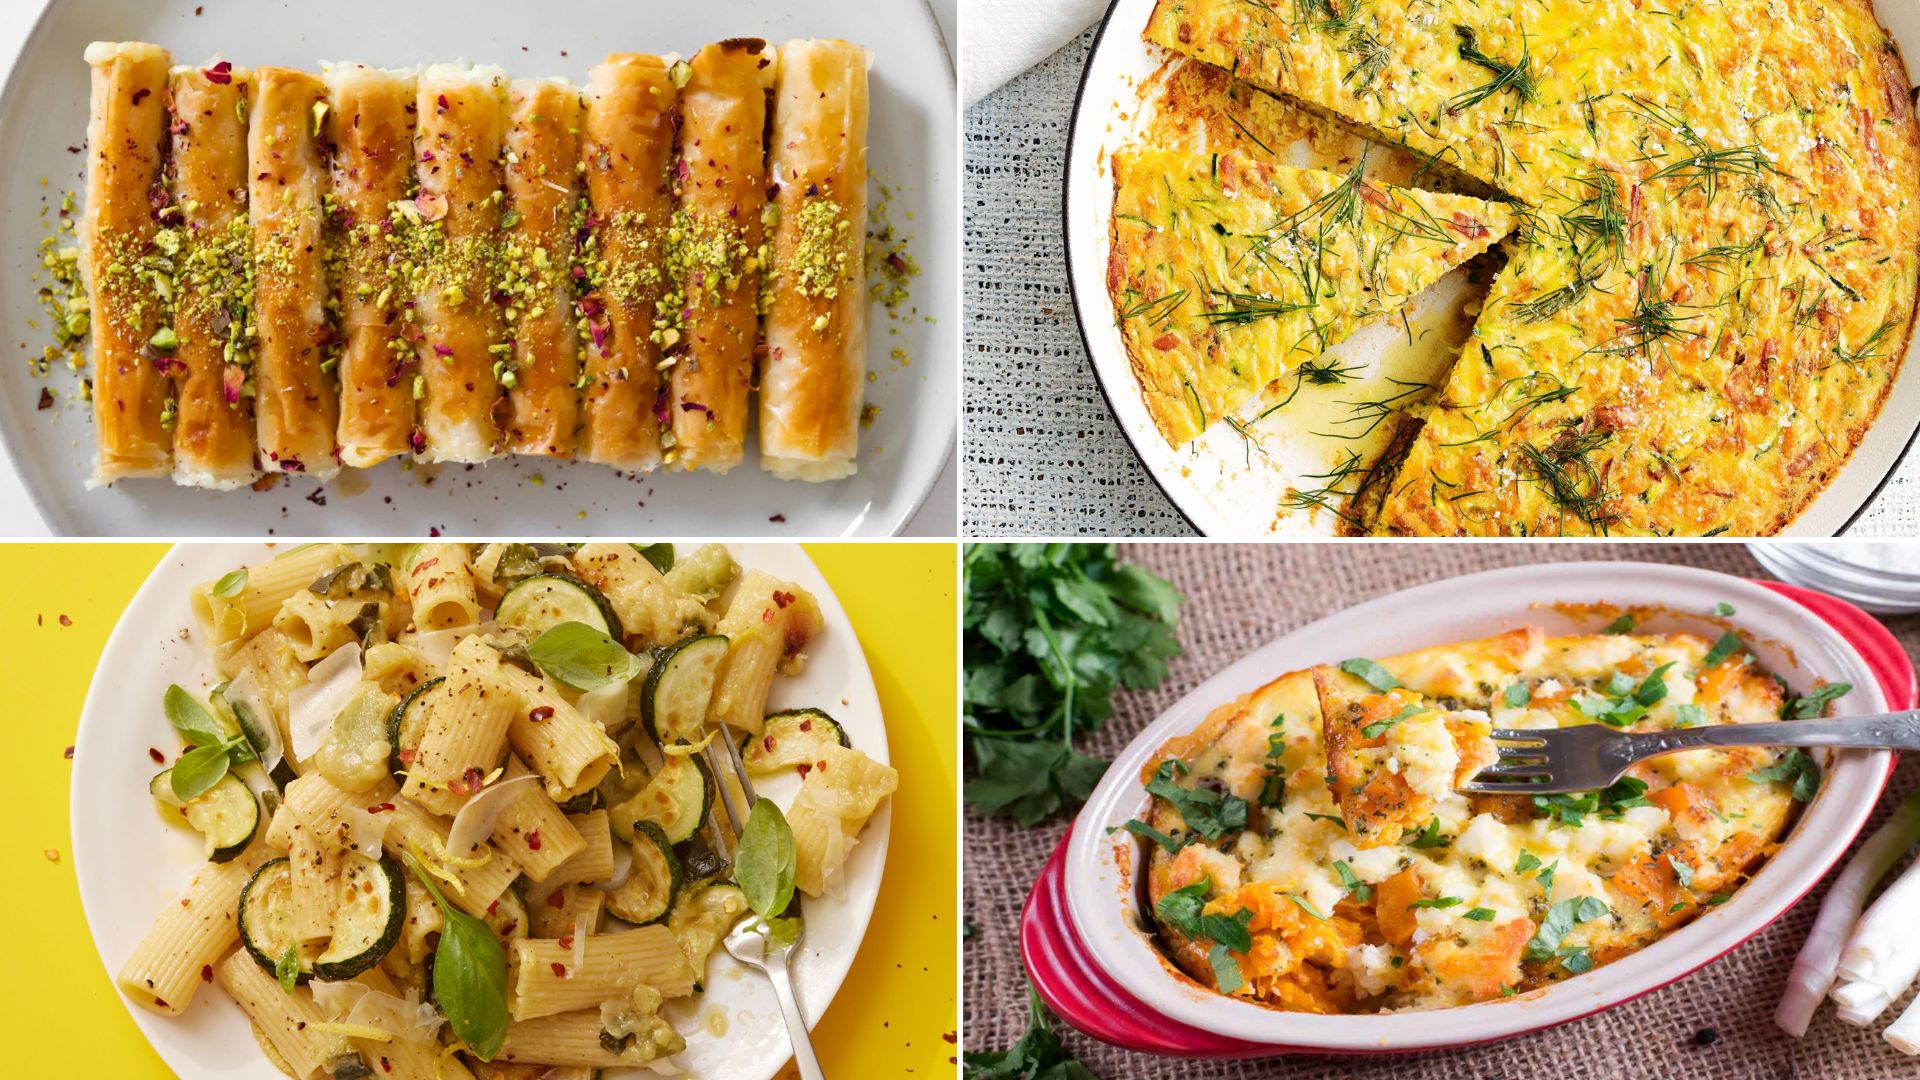 Spice Up Your Meals with These Tangy Recipes That Start with Z